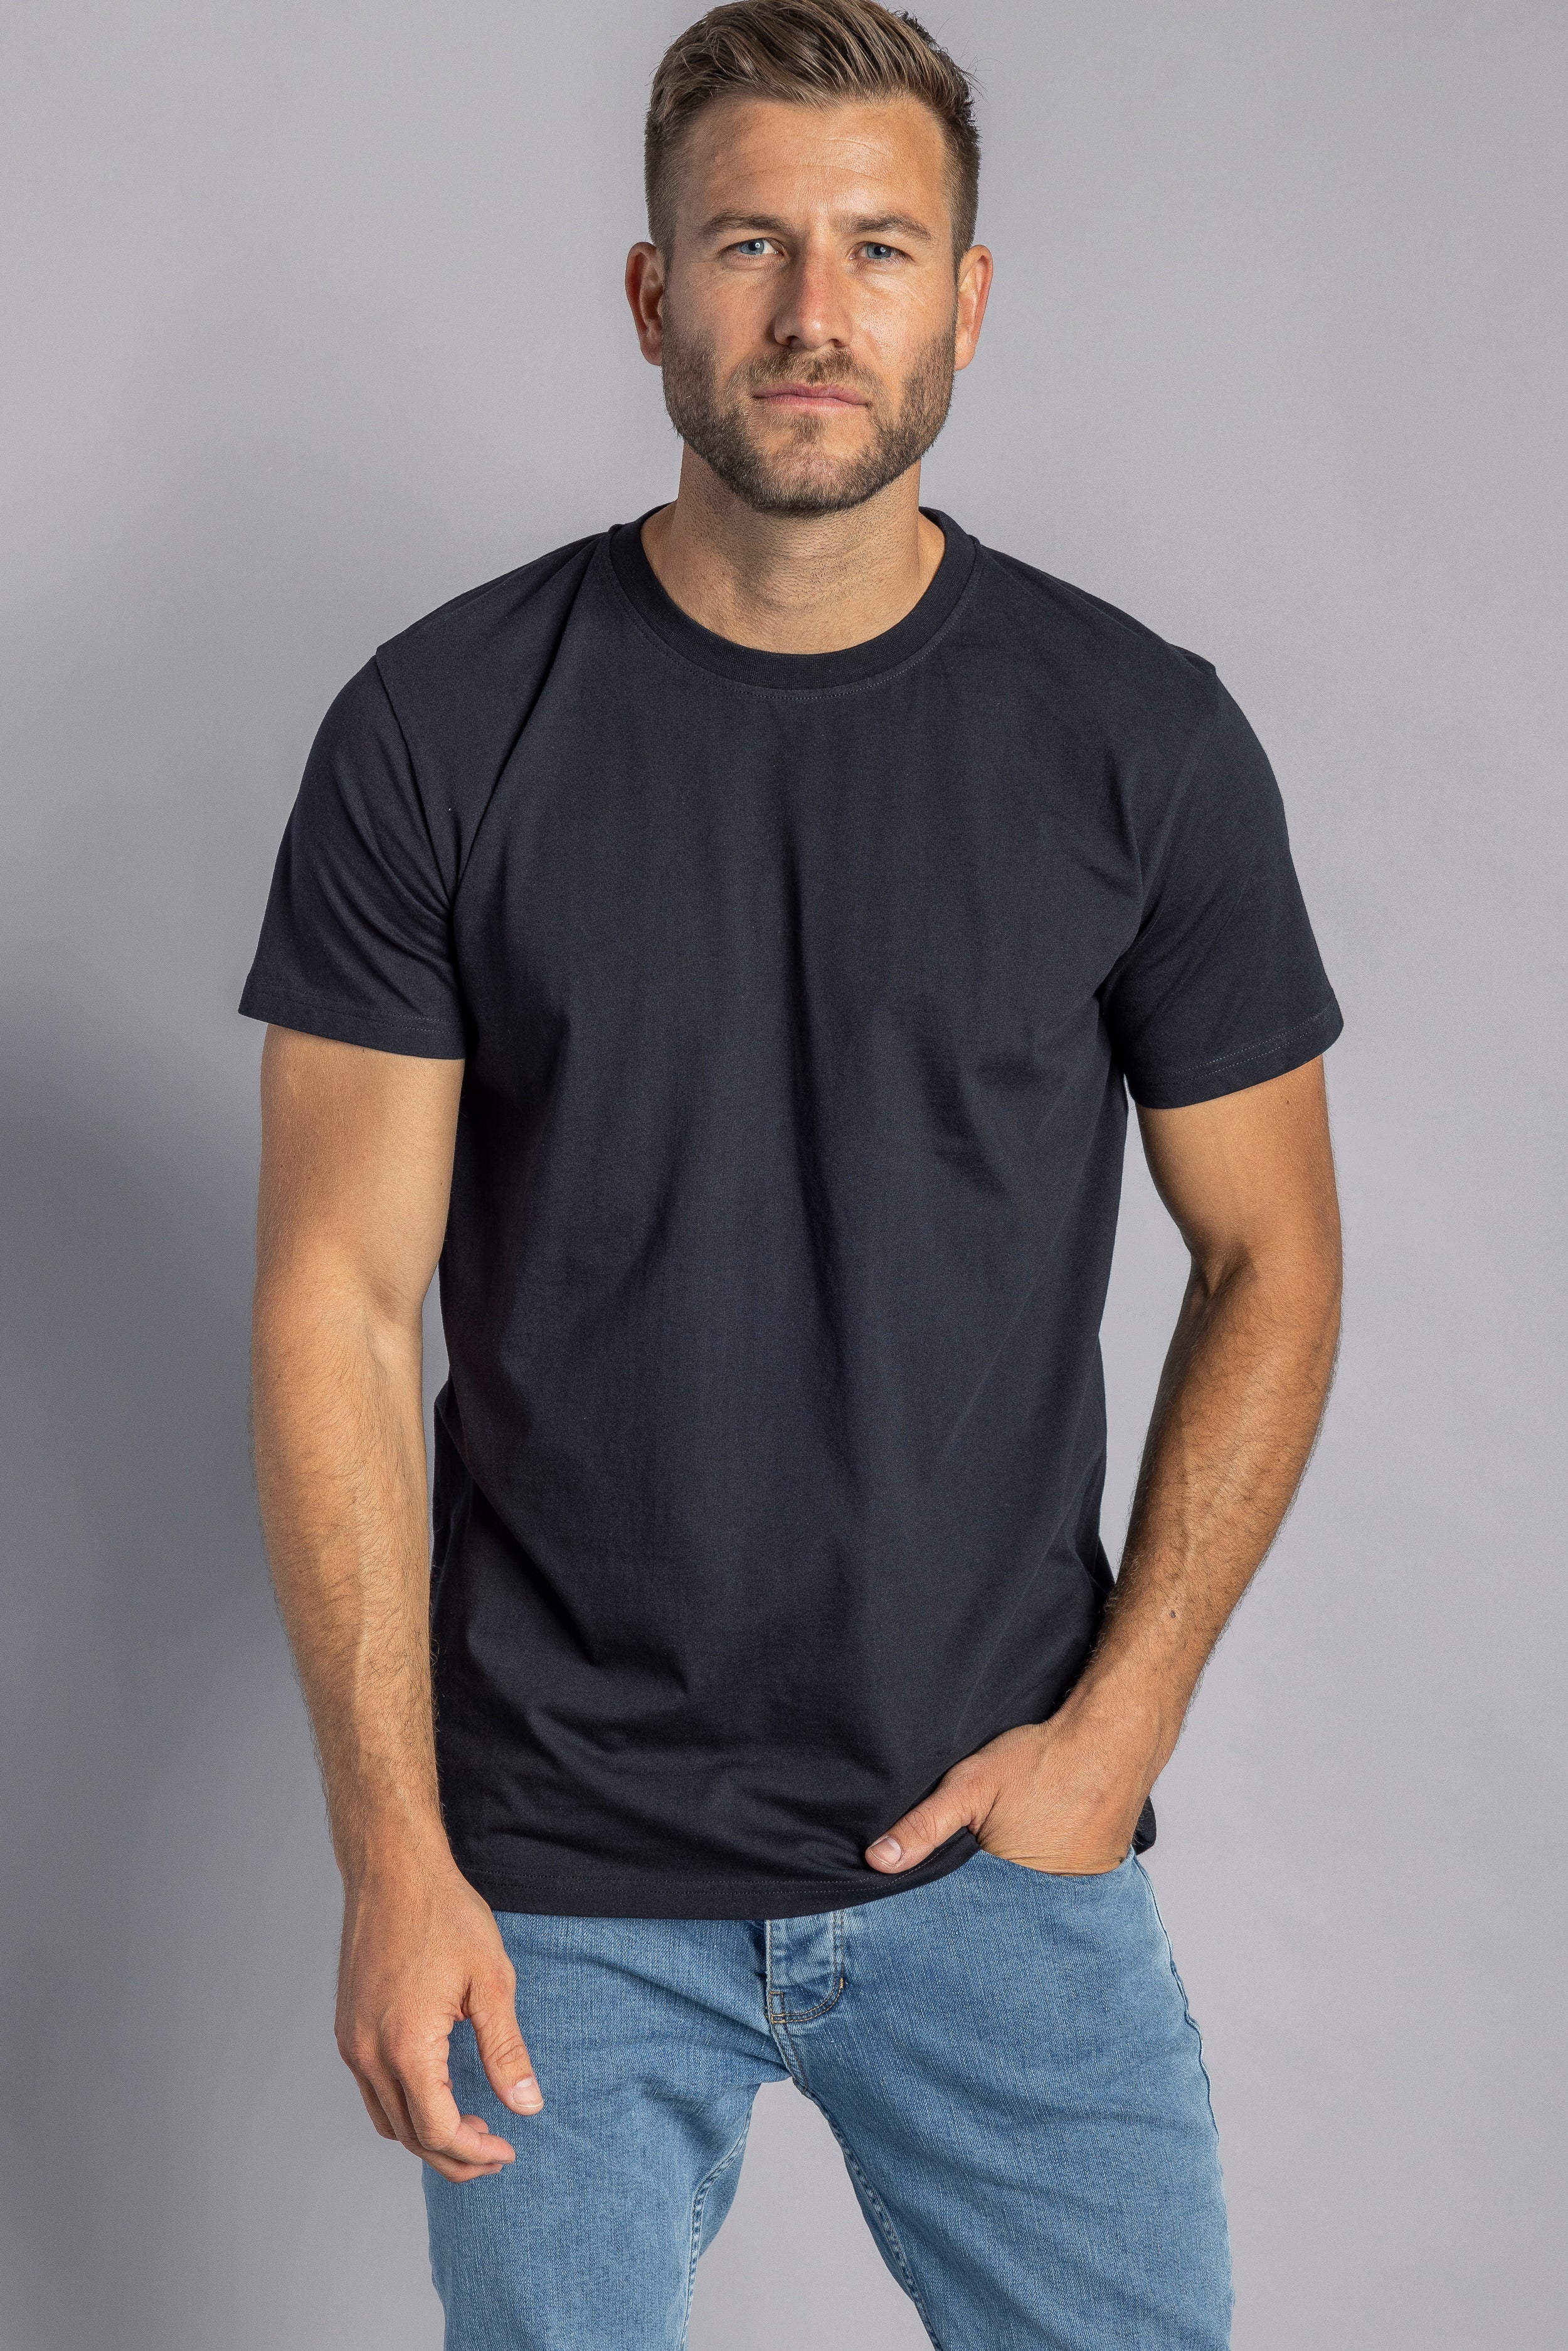 Black Premium Blank Slim T-shirt made from 100% organic cotton from DIRTS